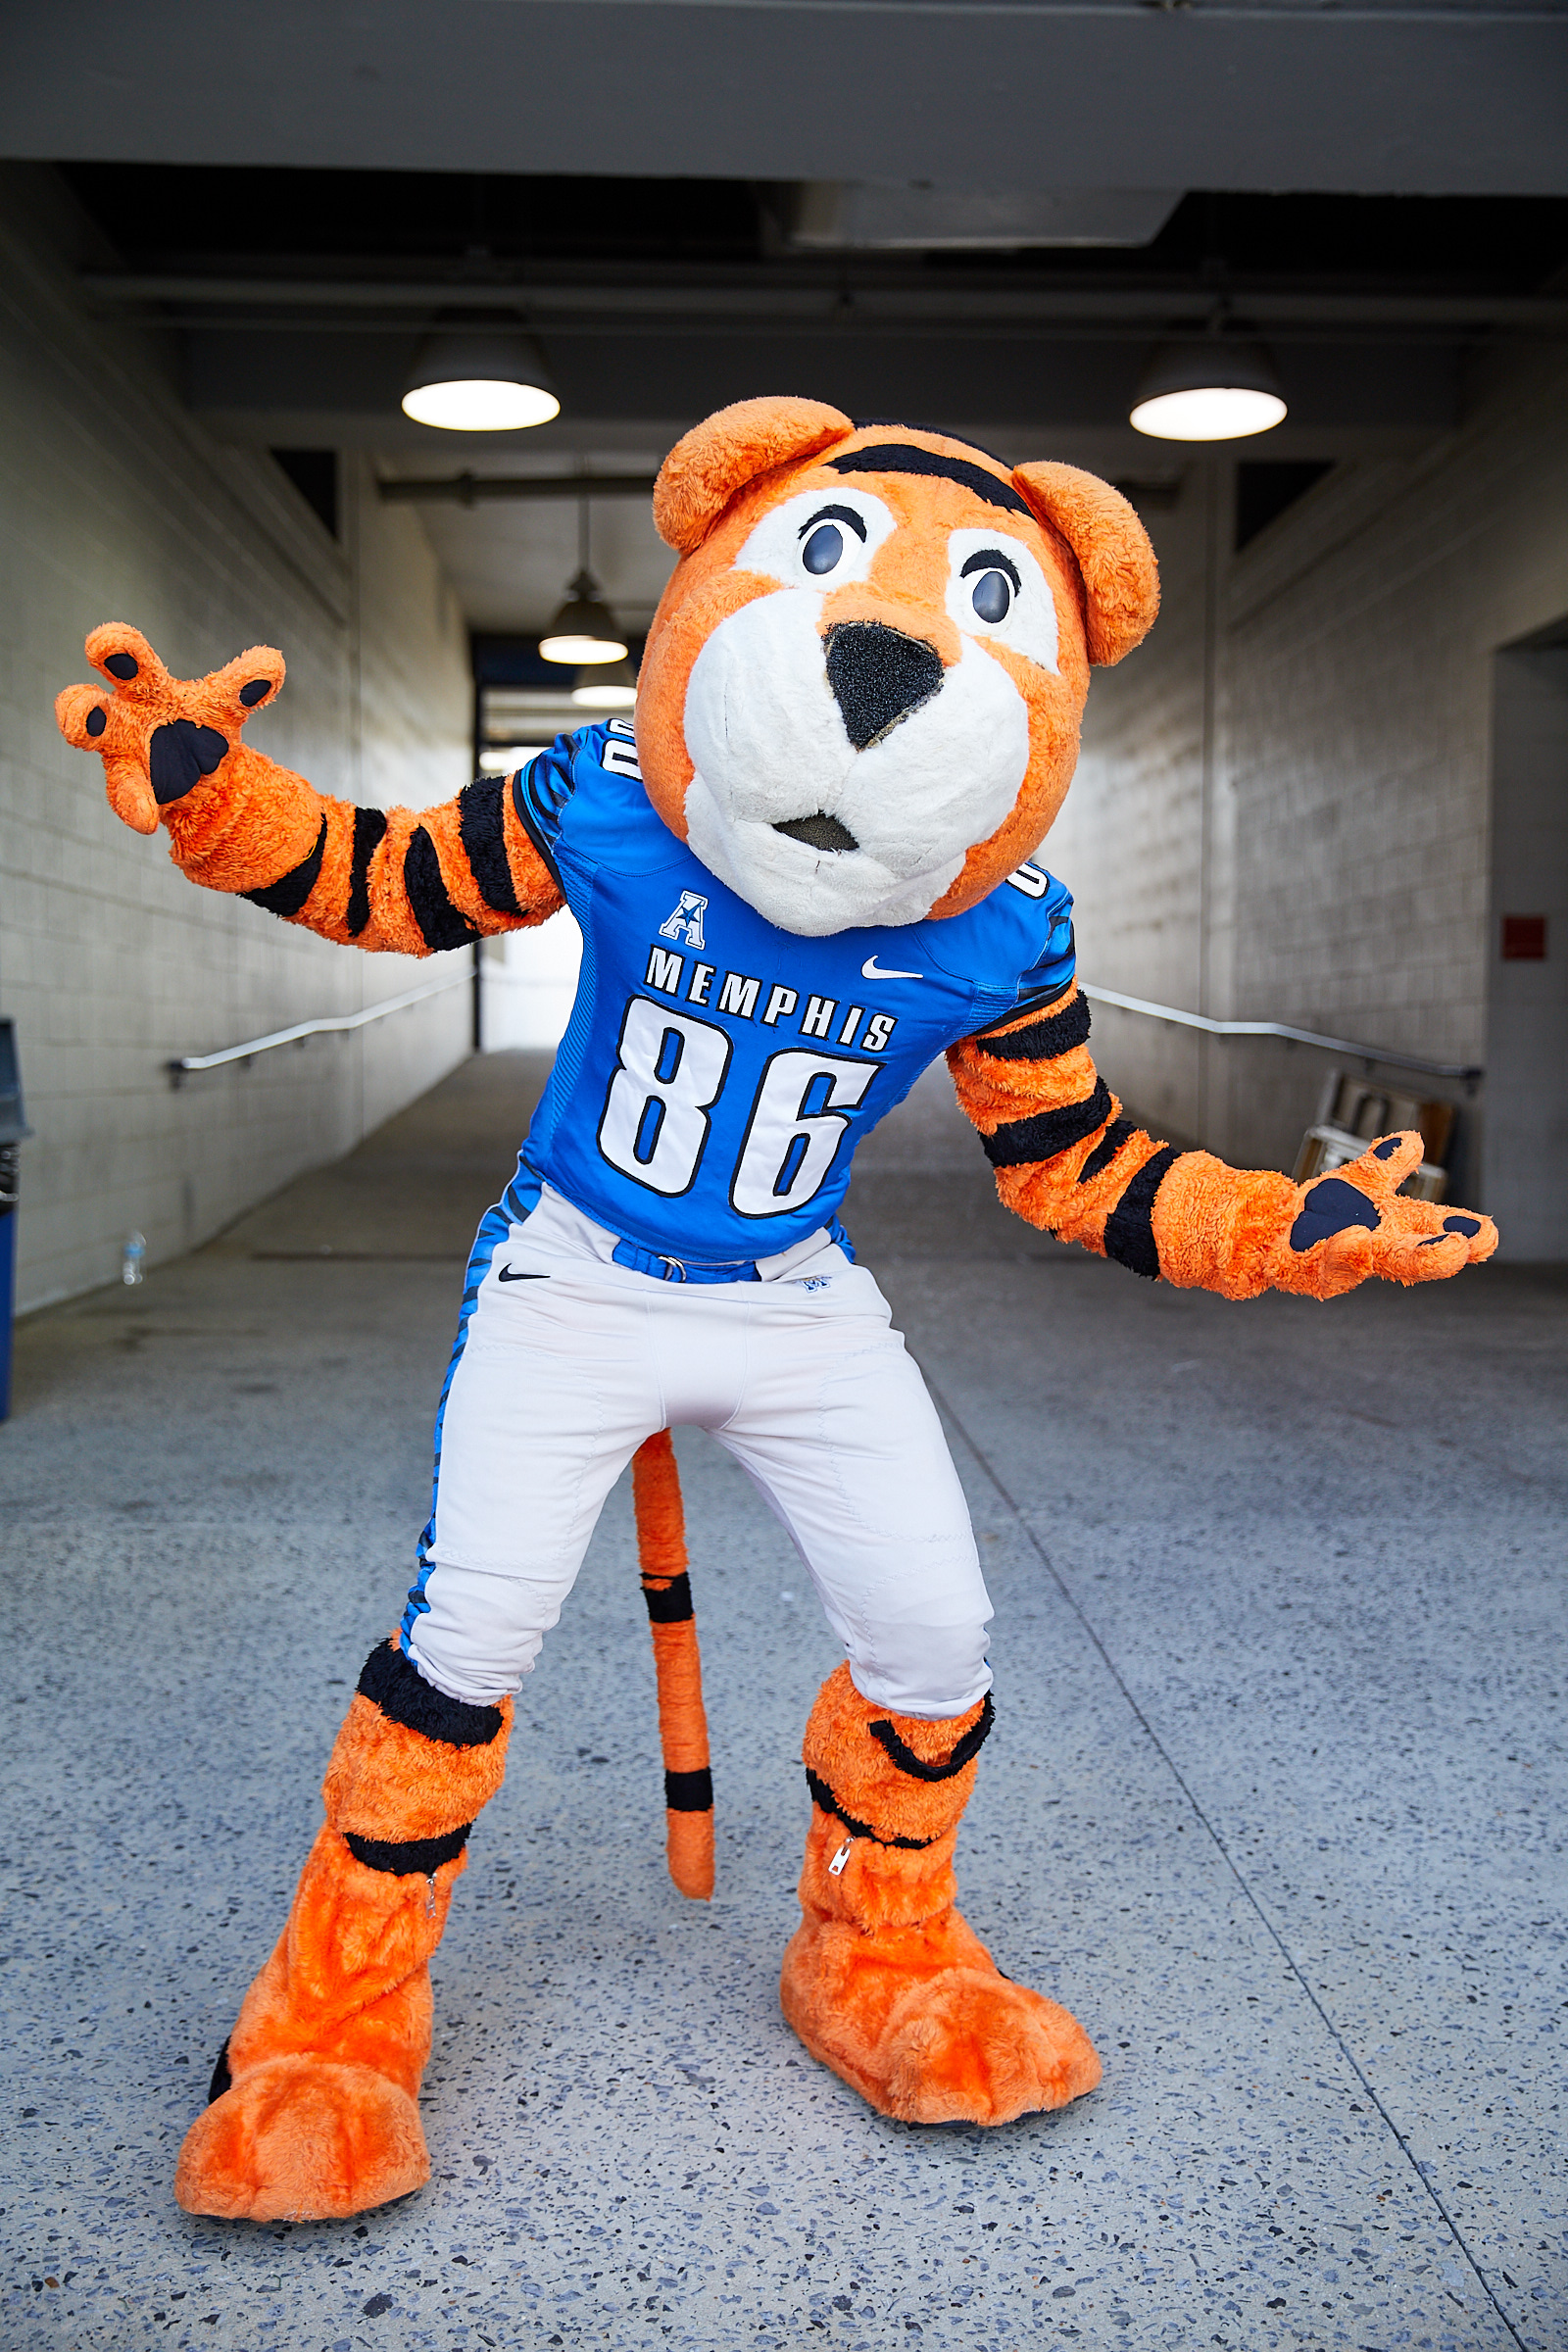 Pouncer, mascot of the Memphis Tigers dances during a timeout